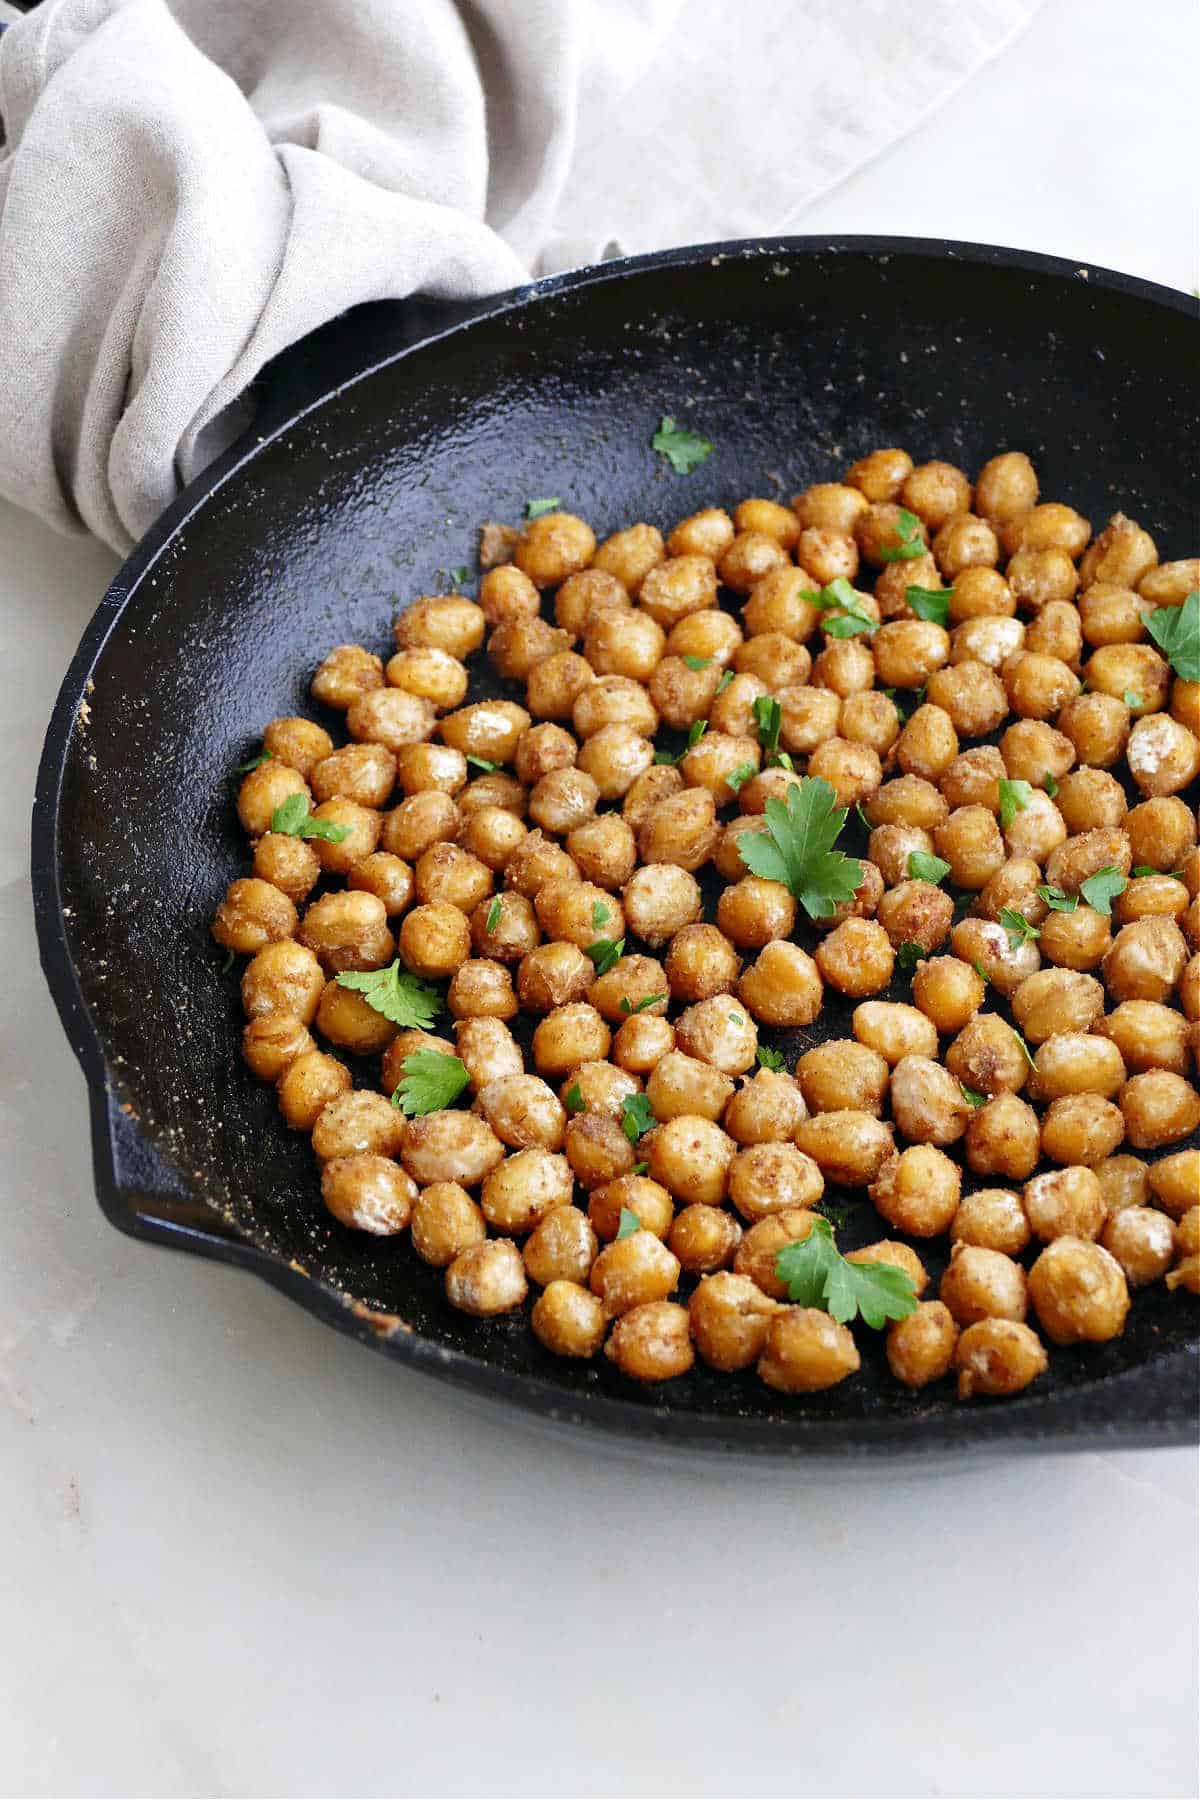 sautéed chickpeas with seasonings in a cast iron skillet with a napkin on the handle